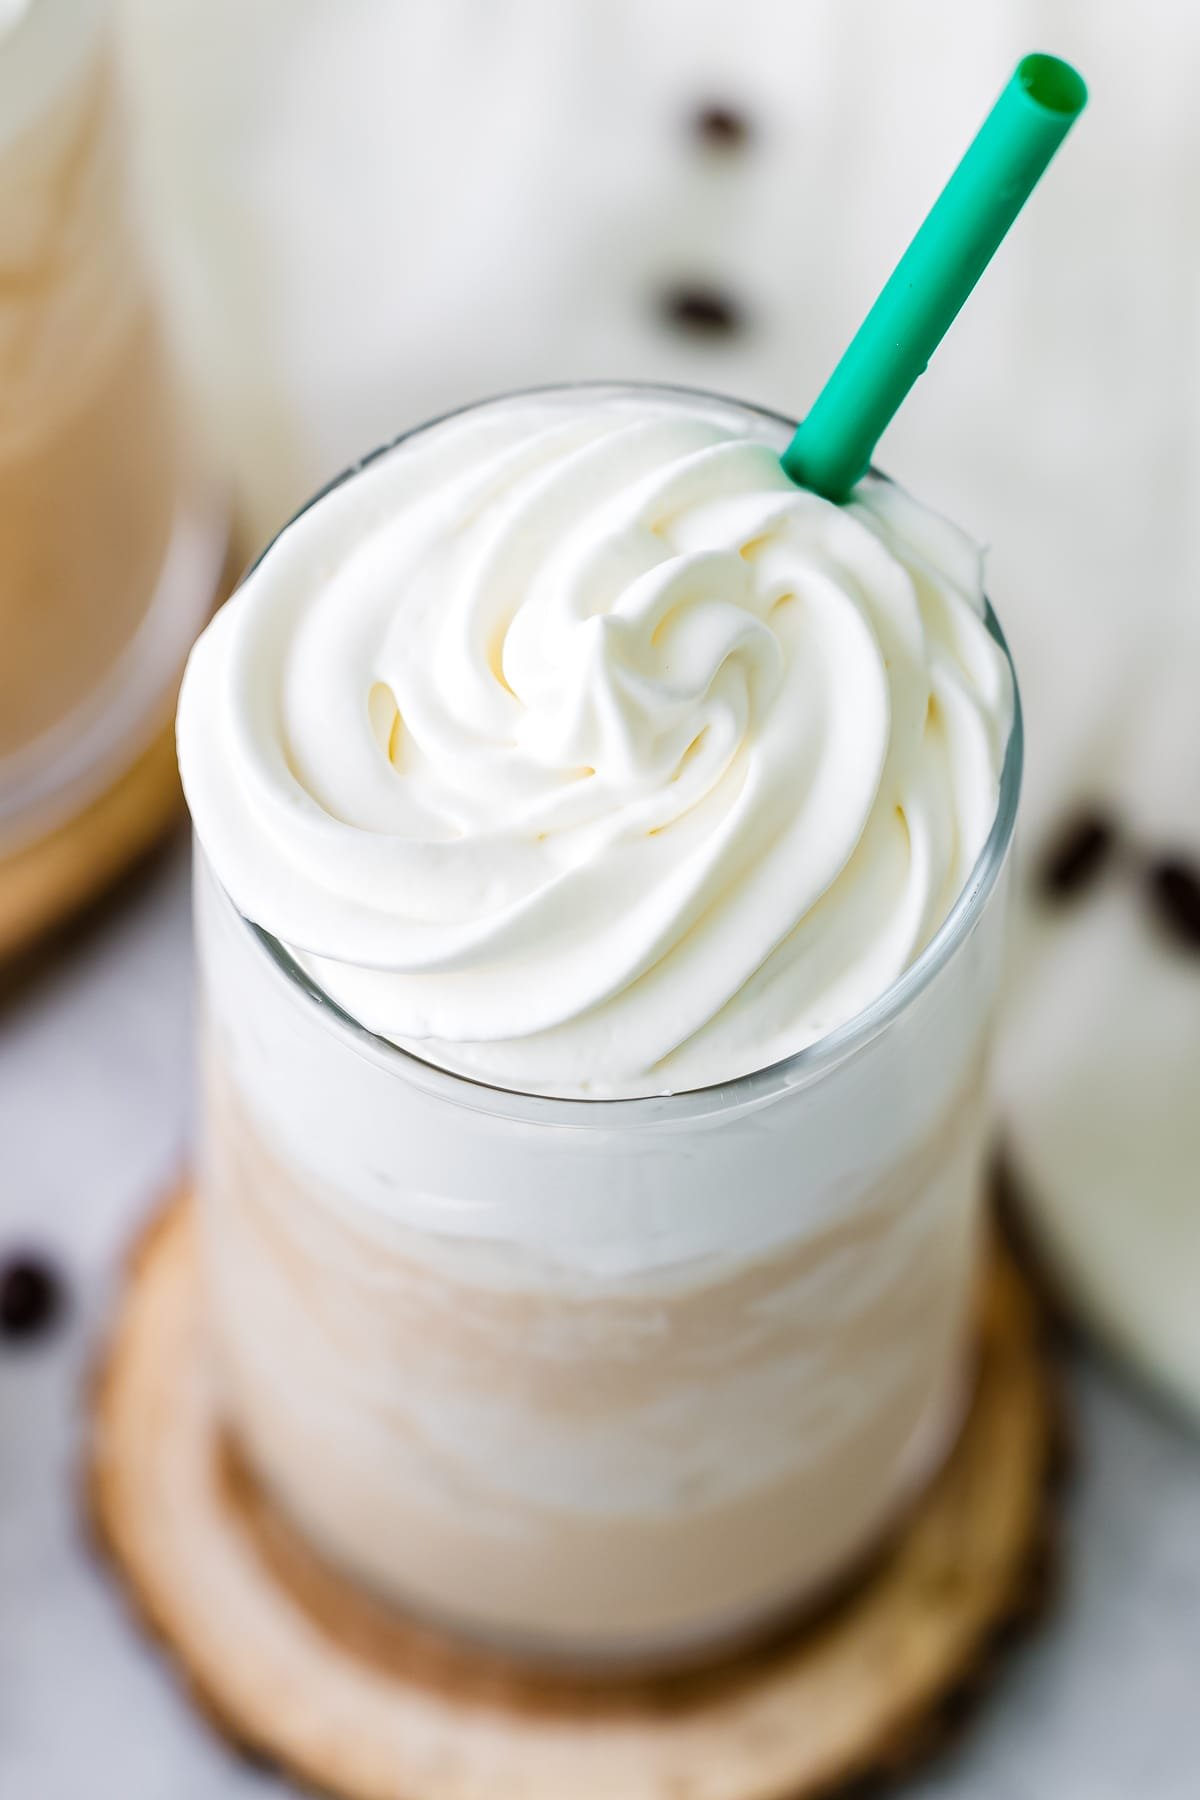 upclose white chocolate mocha in glass with green straw